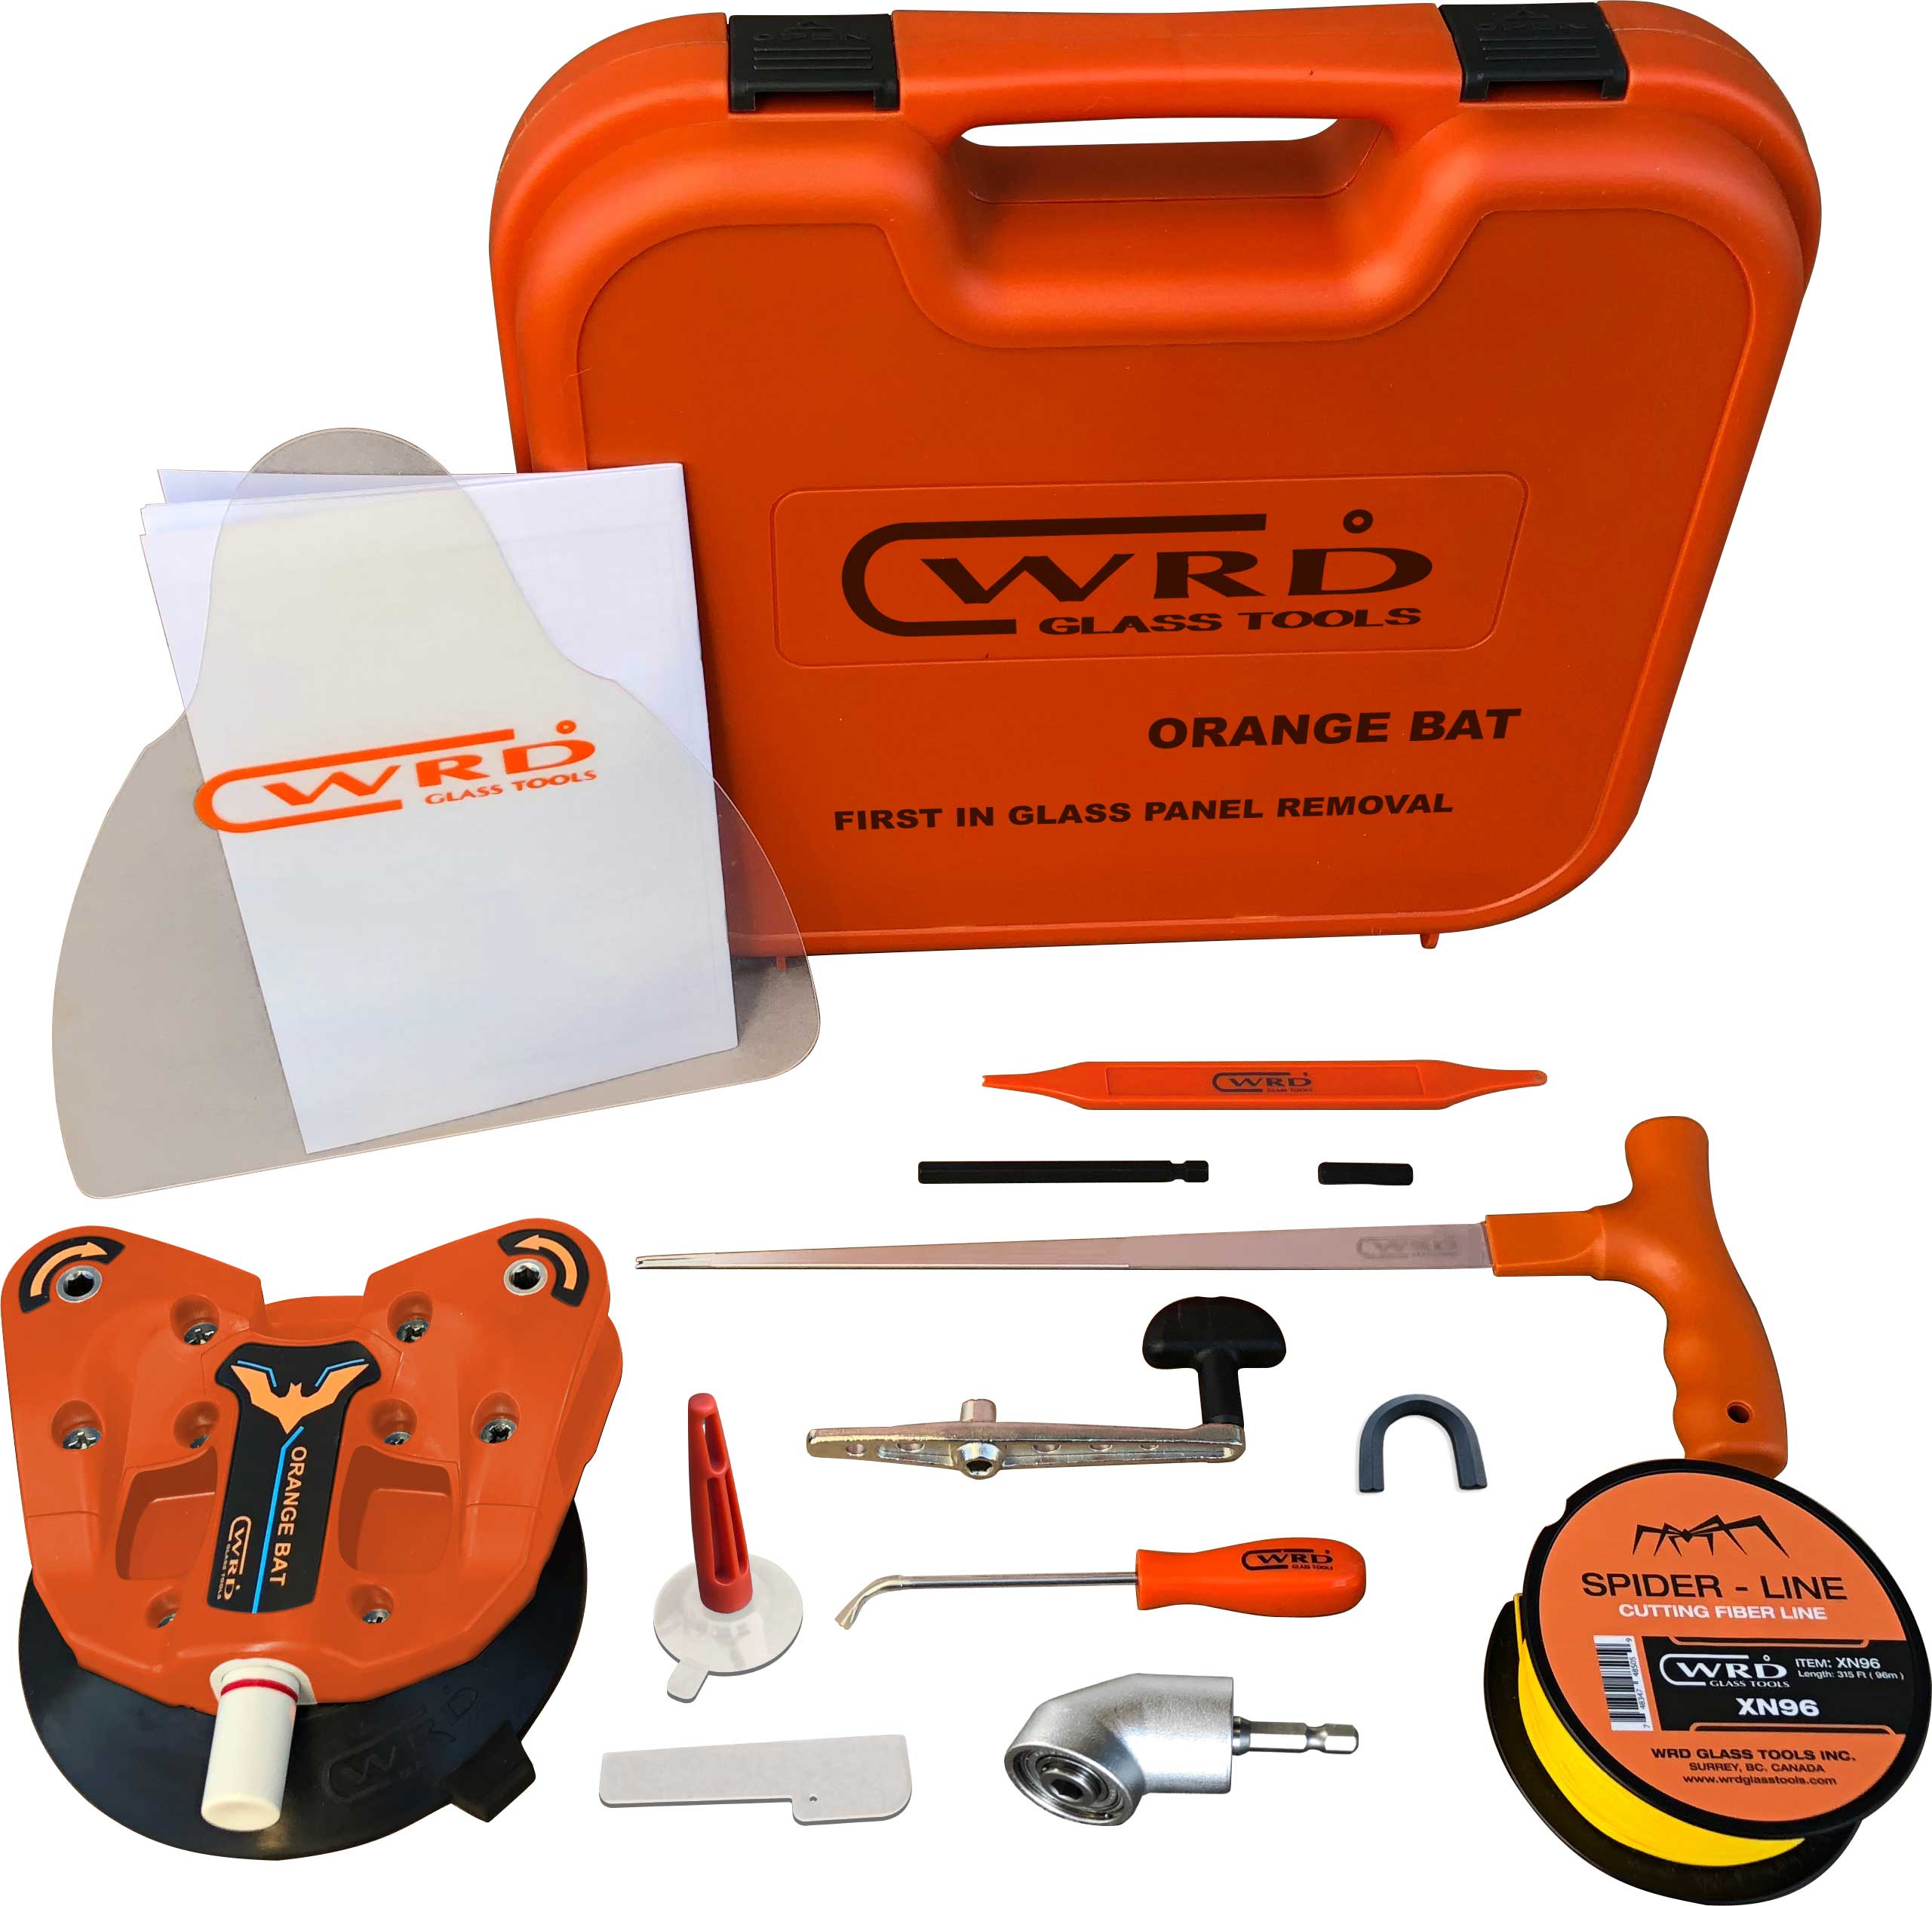 WRD Orange Bat Kit 300W OB 300W Windshield wire cut out kit Auto Glass Removal Tools, Professional Windshield fiber wire removal system, Made in Canada - JAAGS